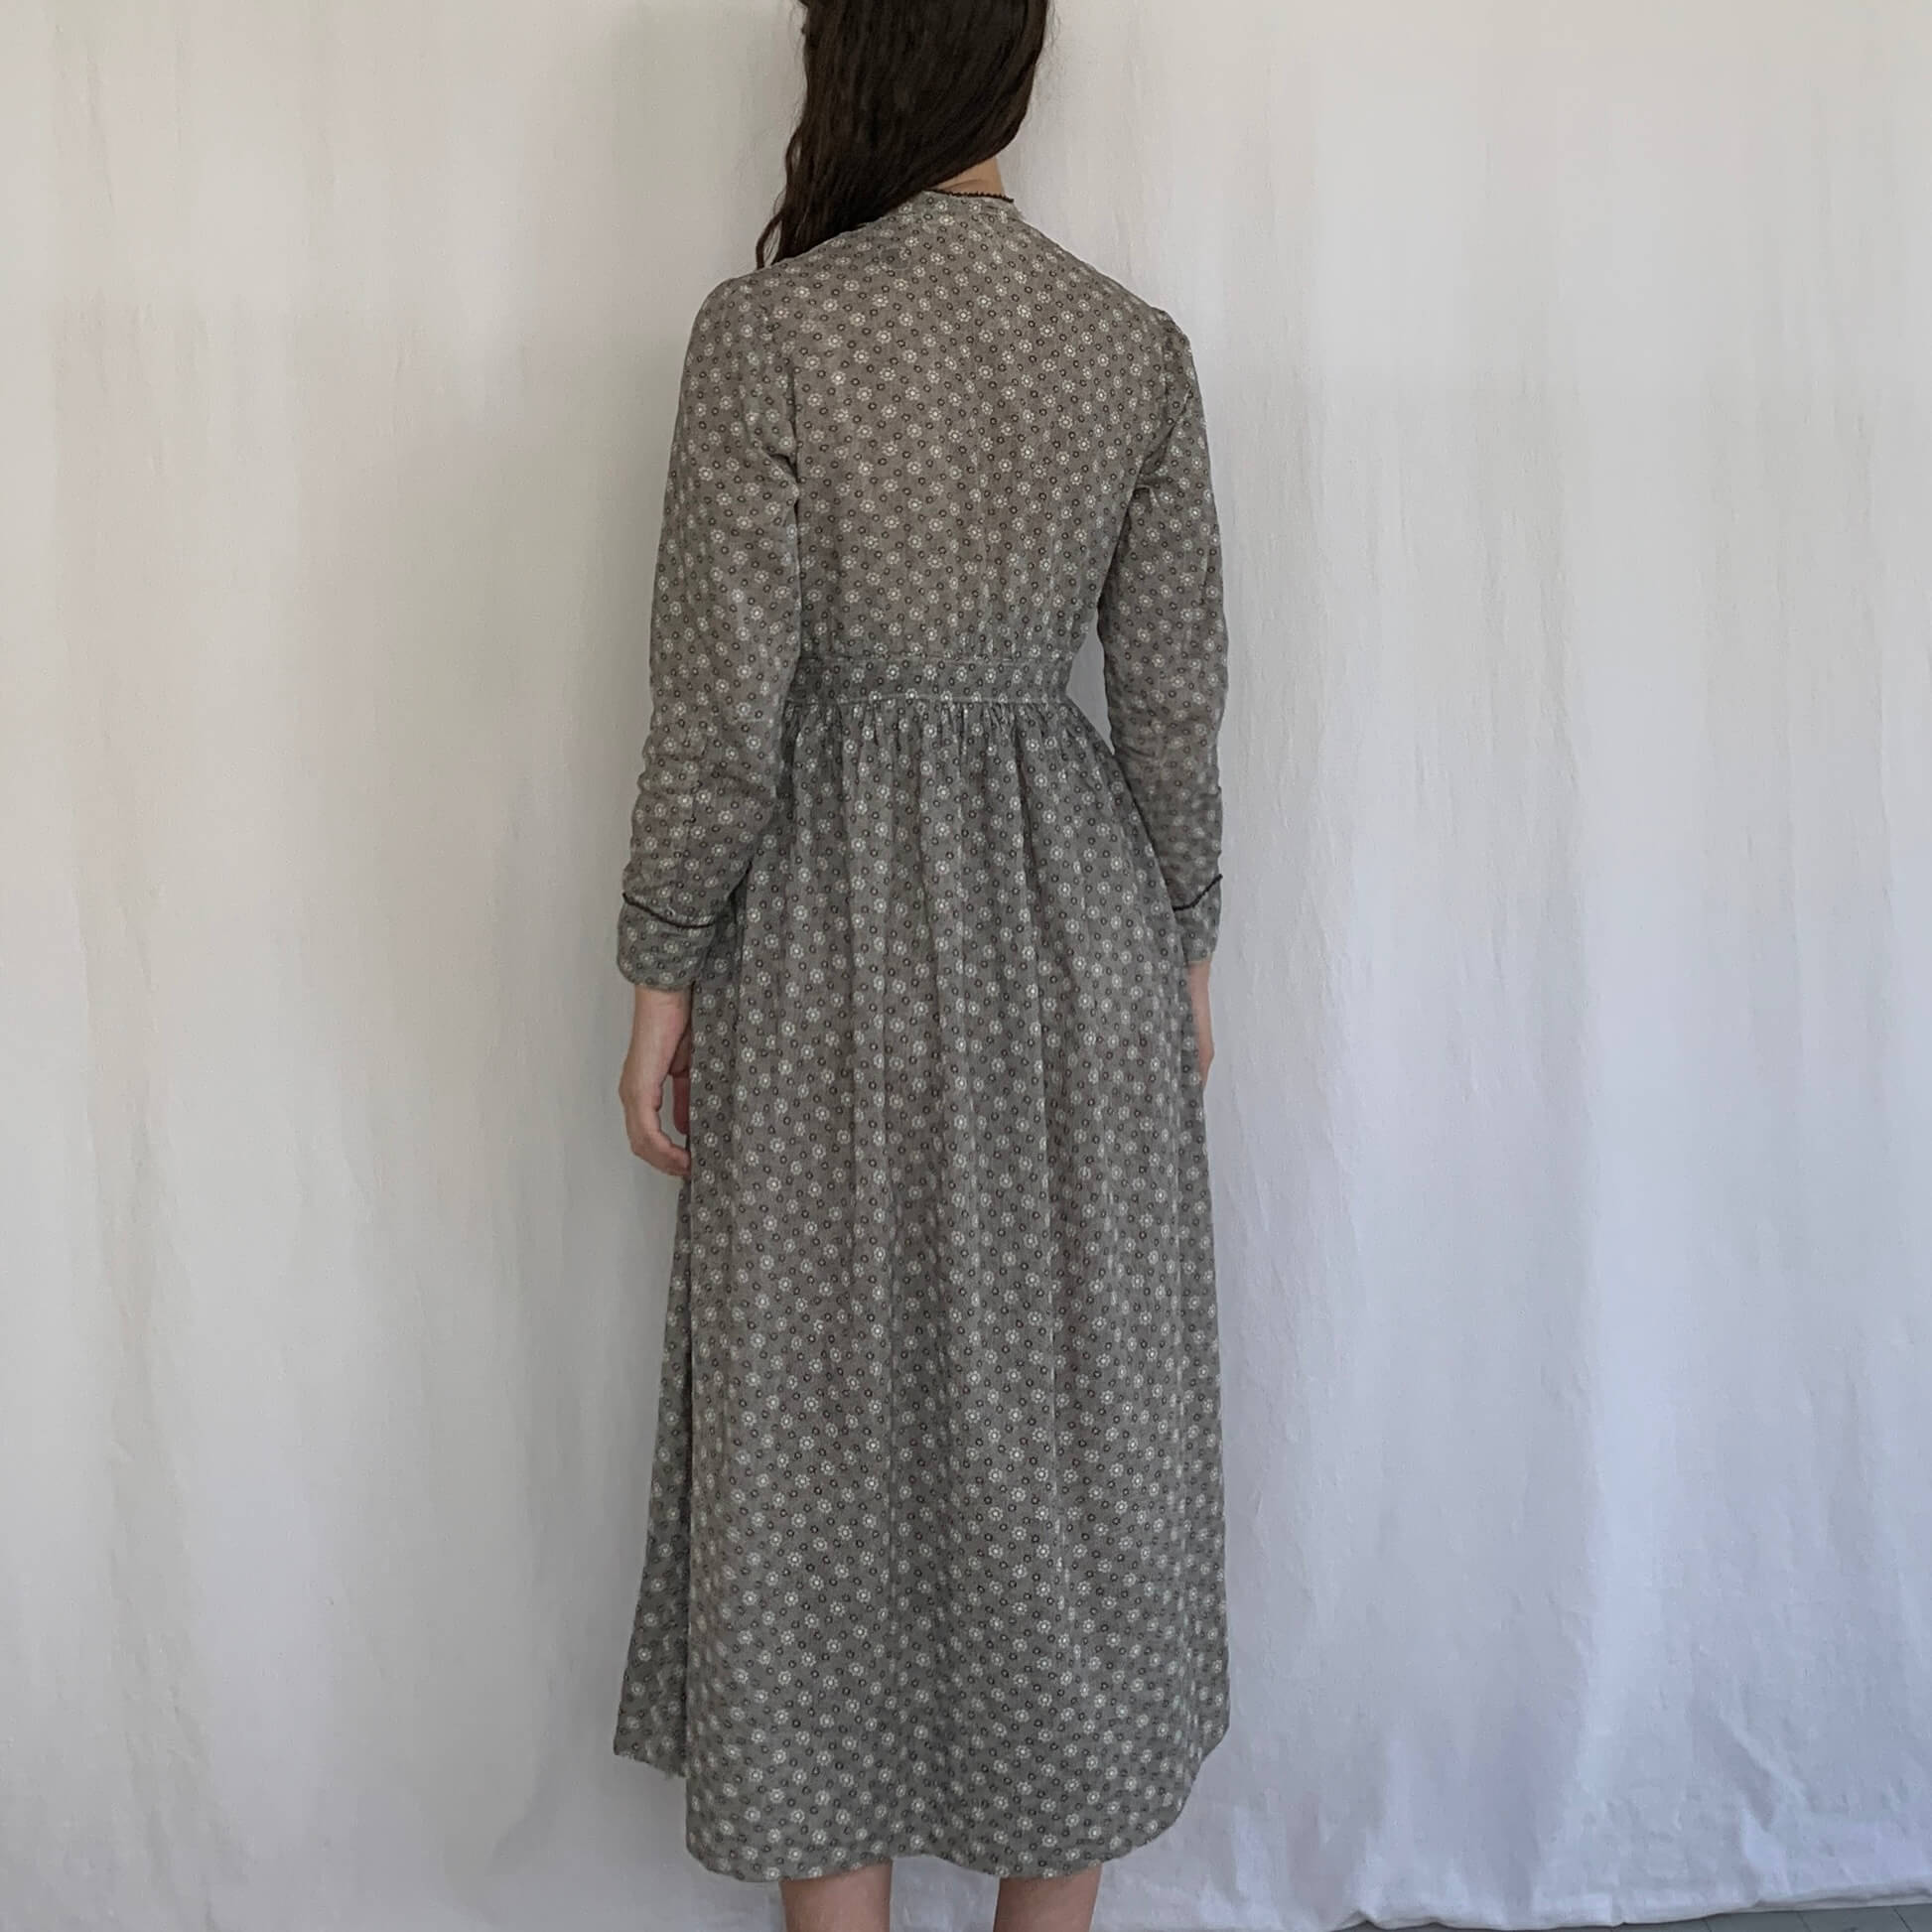 back view of the antique gray cotton dress